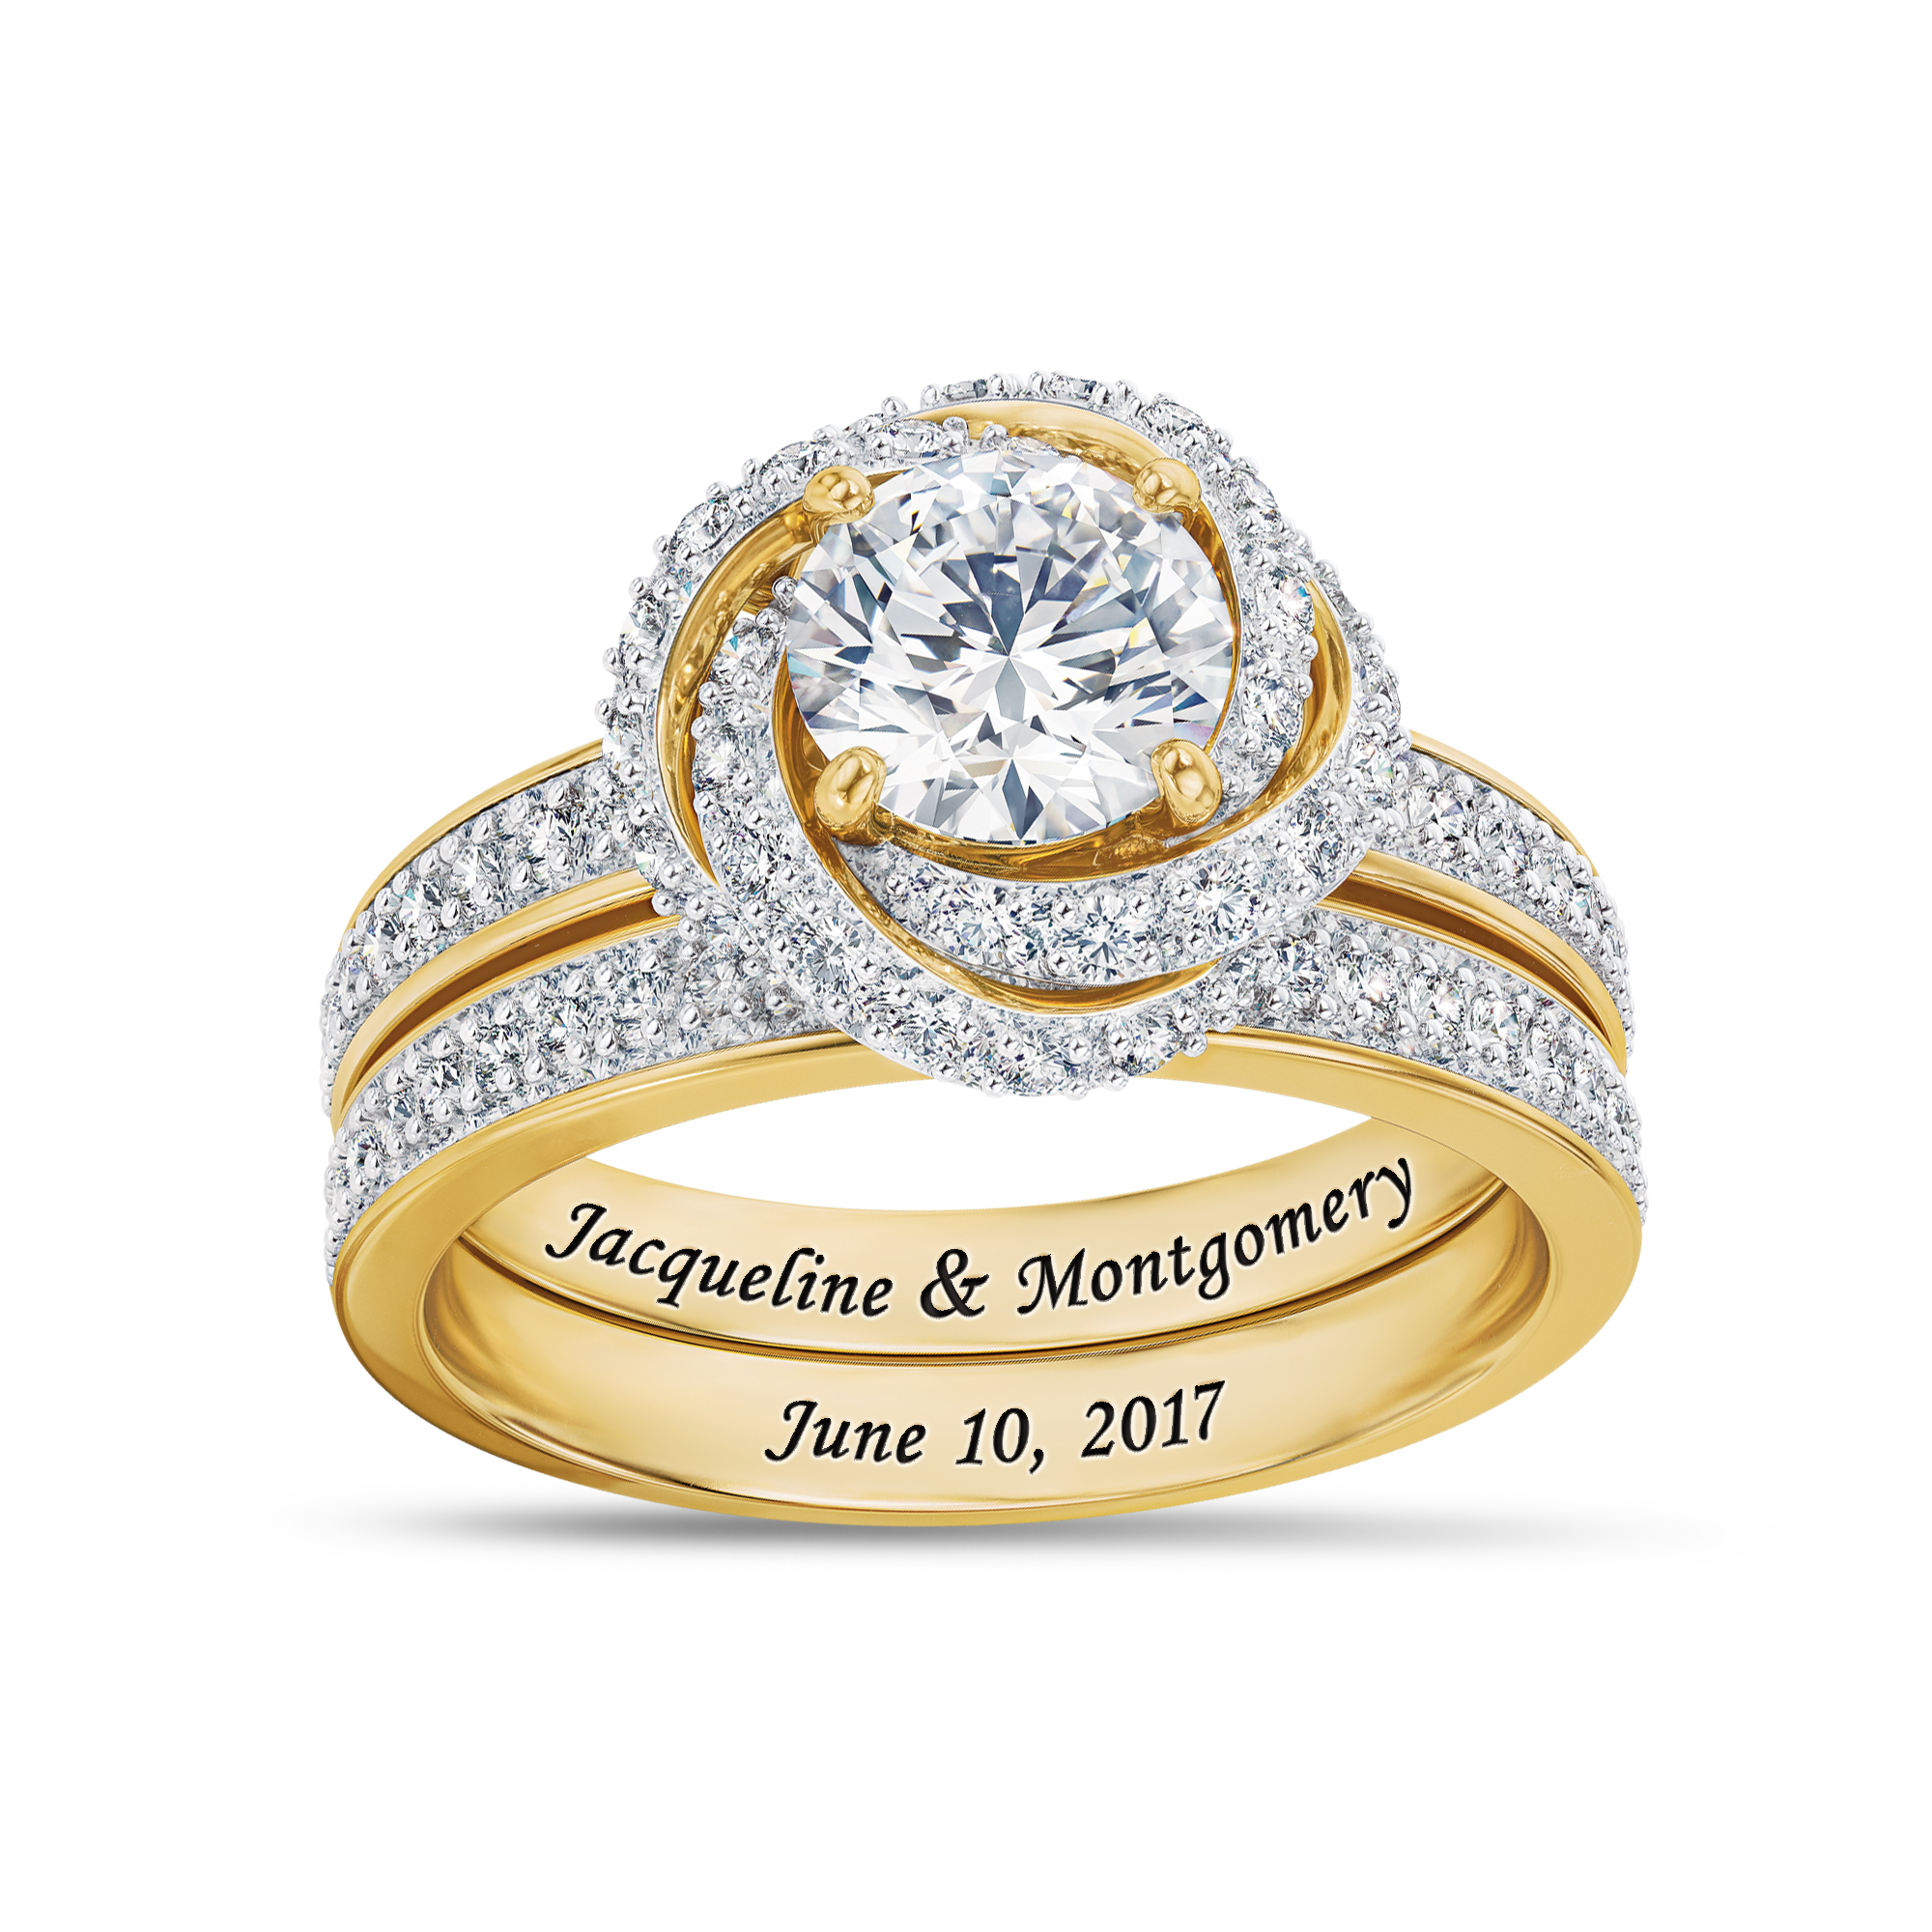 Share more than 191 10 year wedding anniversary ring latest